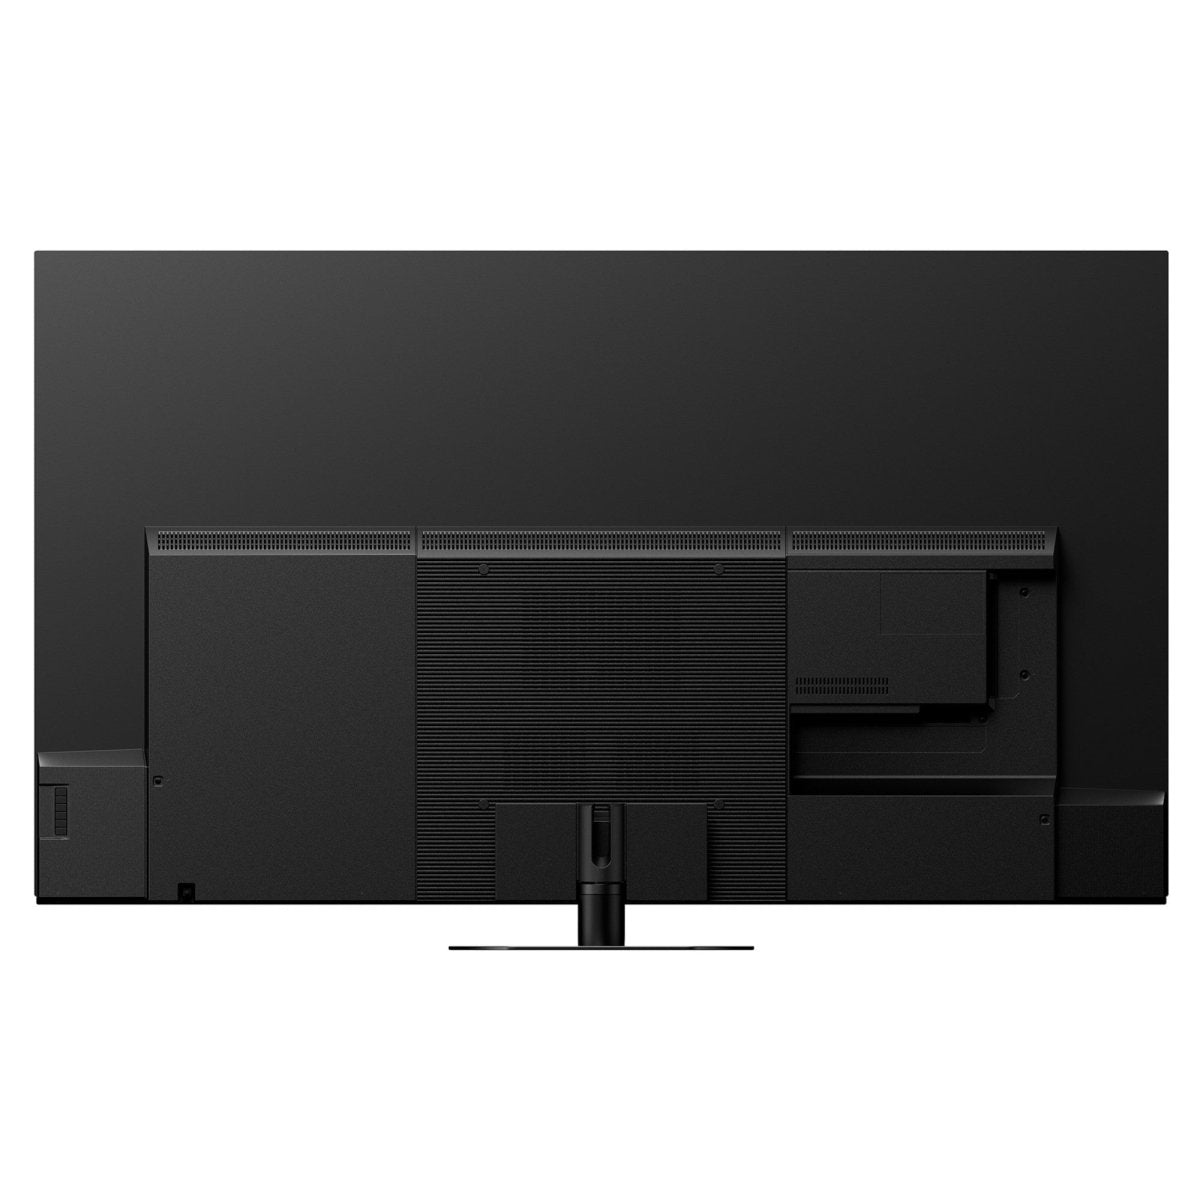 Panasonic TX55JZ1500B OLED HDR 4K Ultra HD Smart TV, 55 inch with Freeview Play & Dolby Atmos, Black | Atlantic Electrics